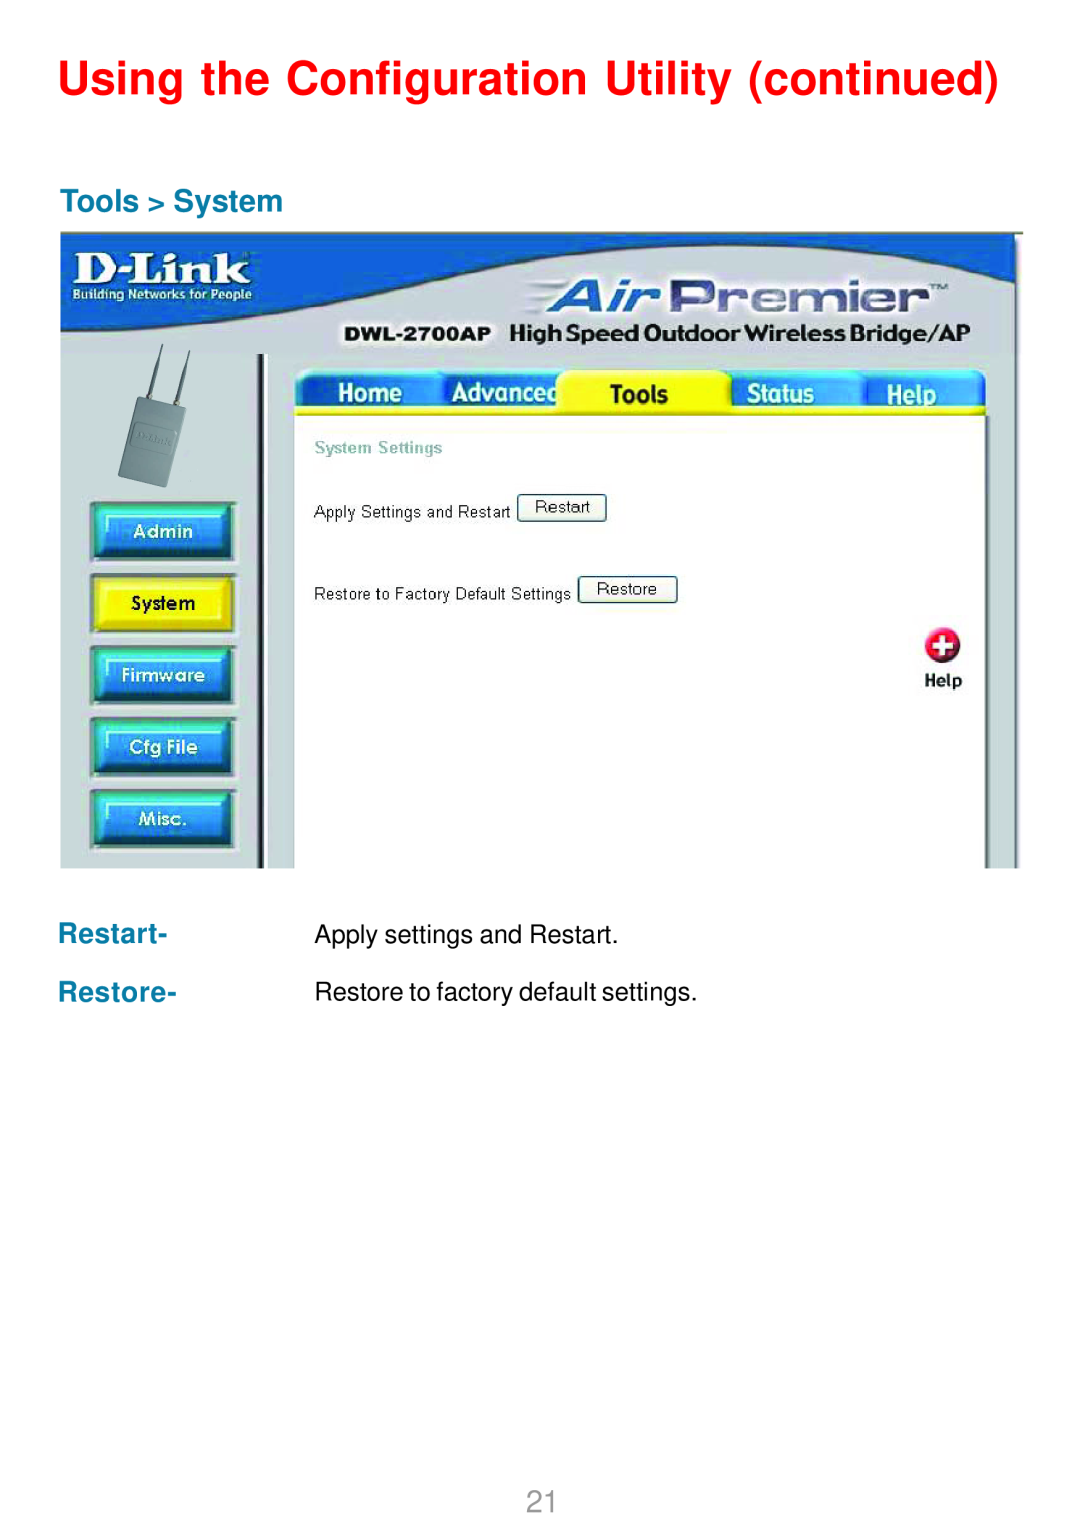 D-Link DWL-2700AP warranty Tools System, Restart, Restore, Using the Configuration Utility continued 